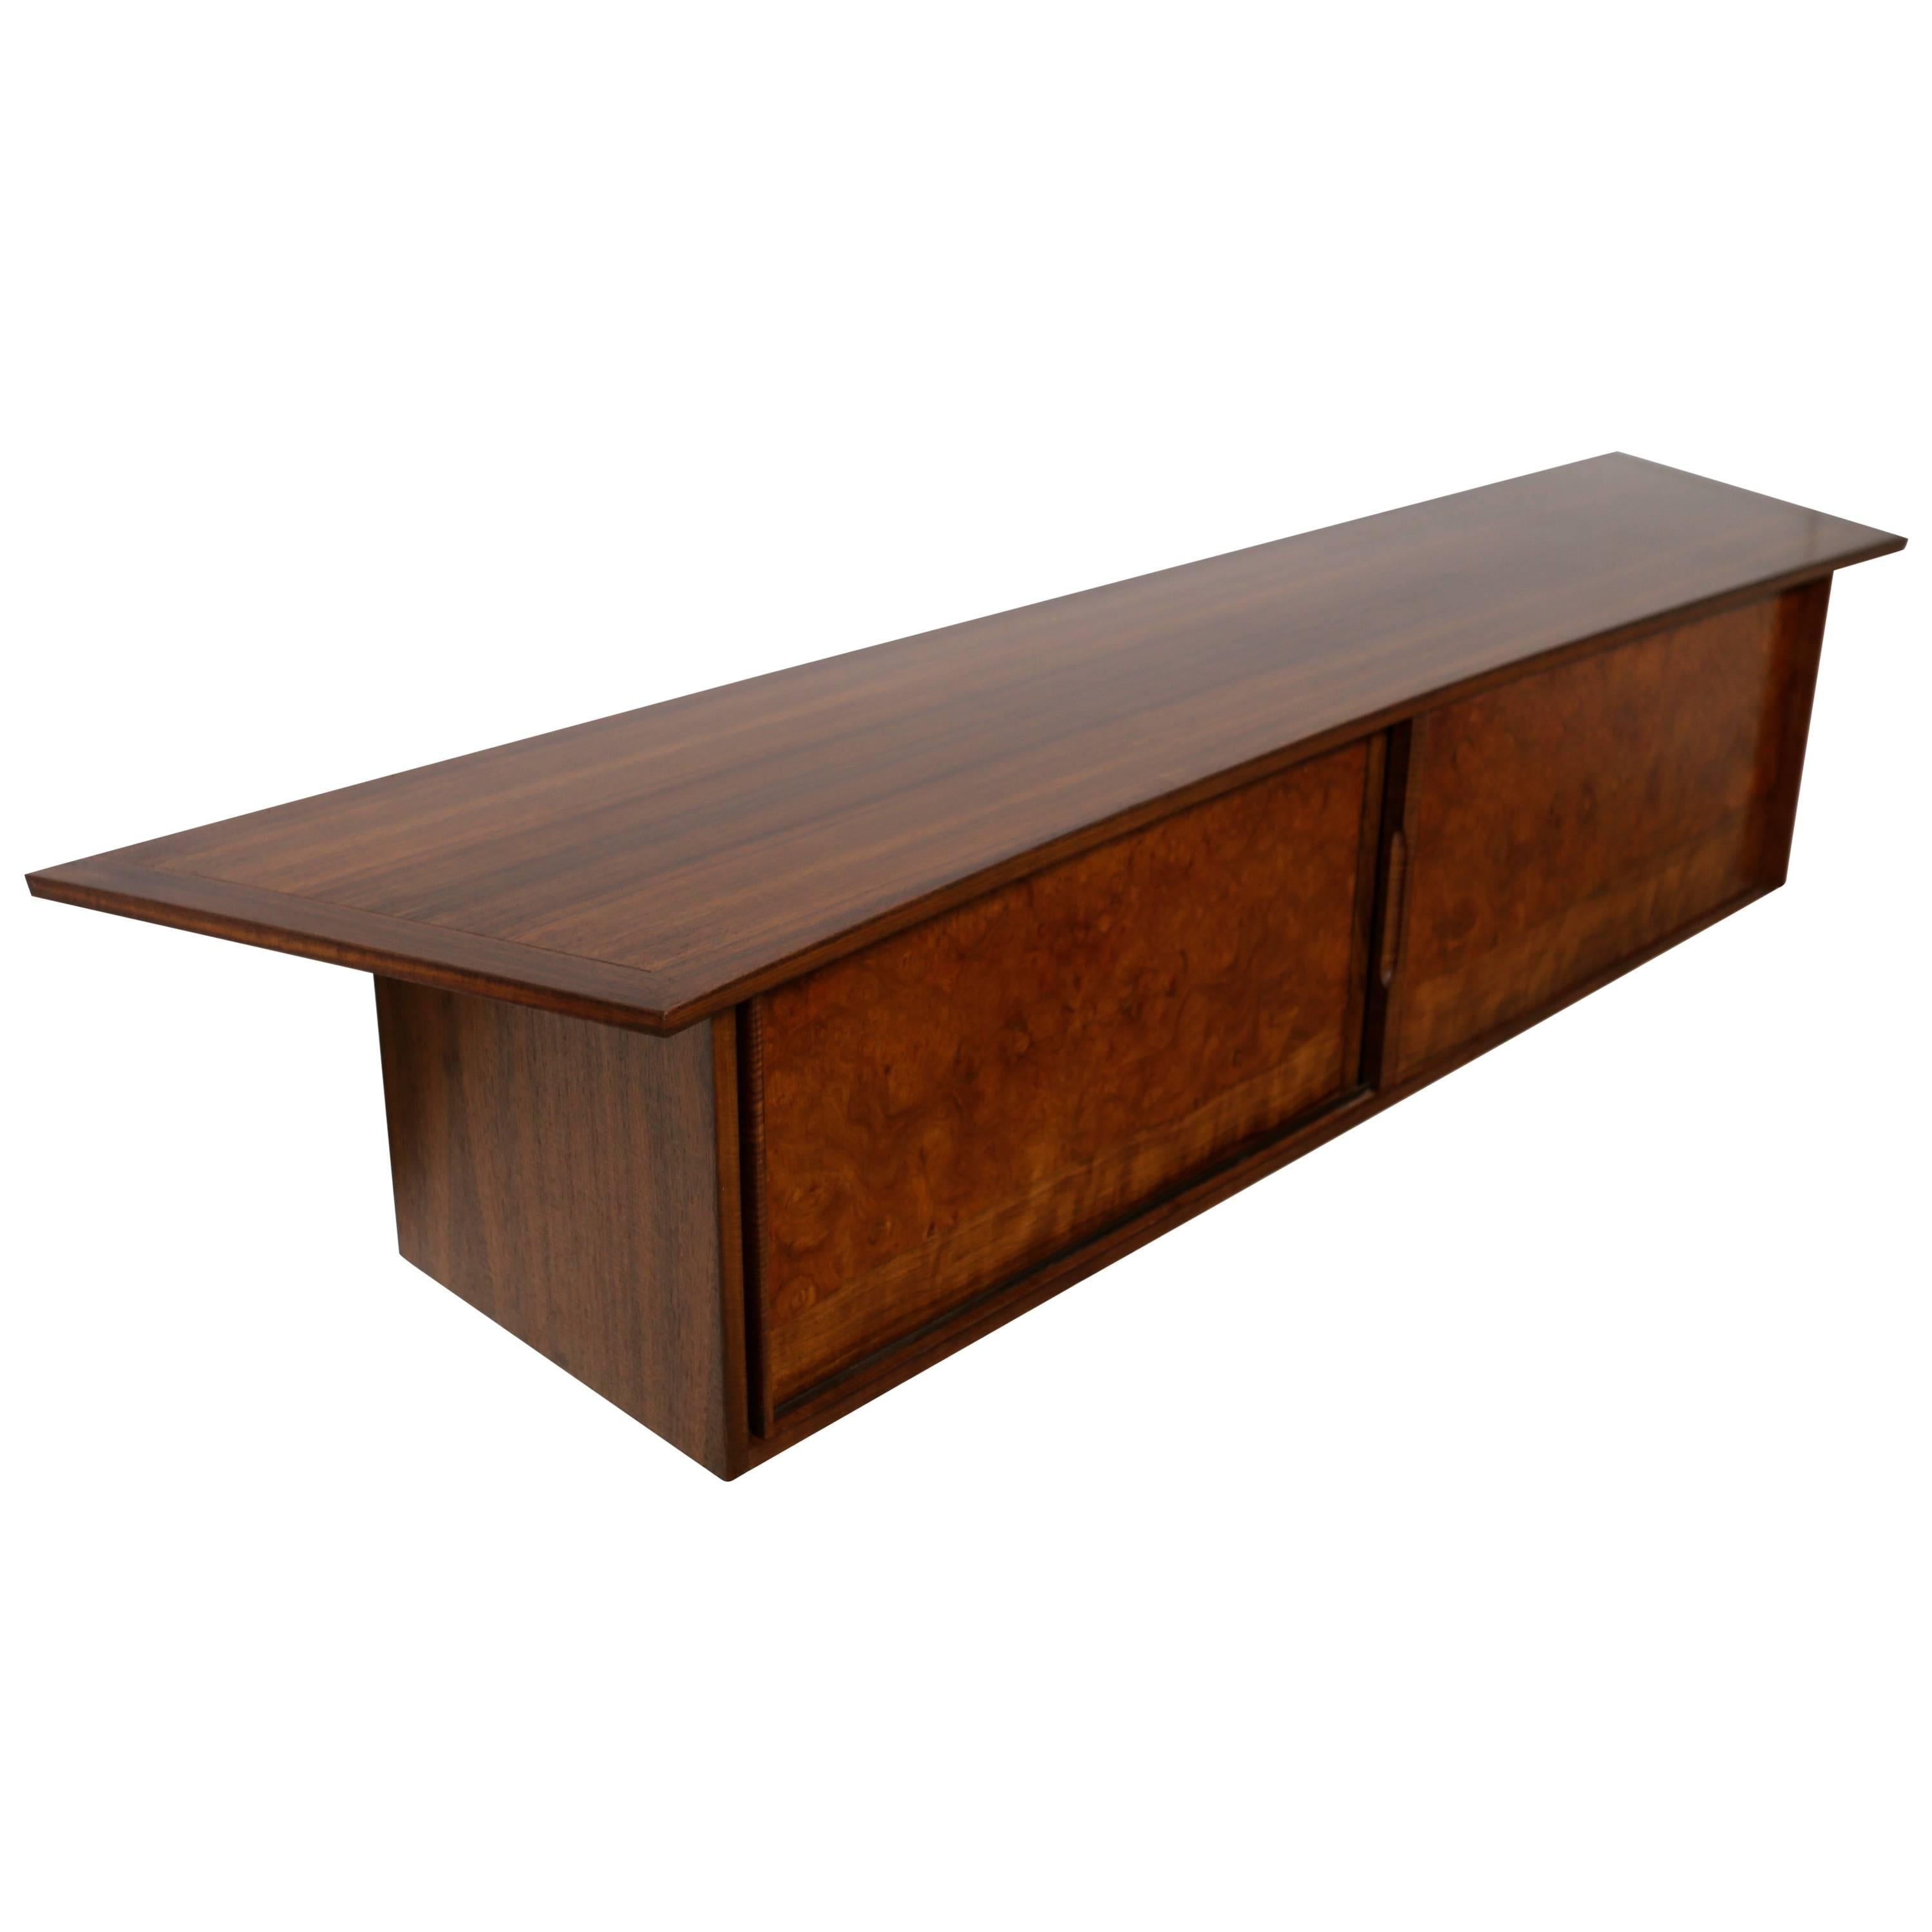 MOVING SALE !!! “Origins" Wall-Mounted Cabinet by George Nakashima for Widdicomb